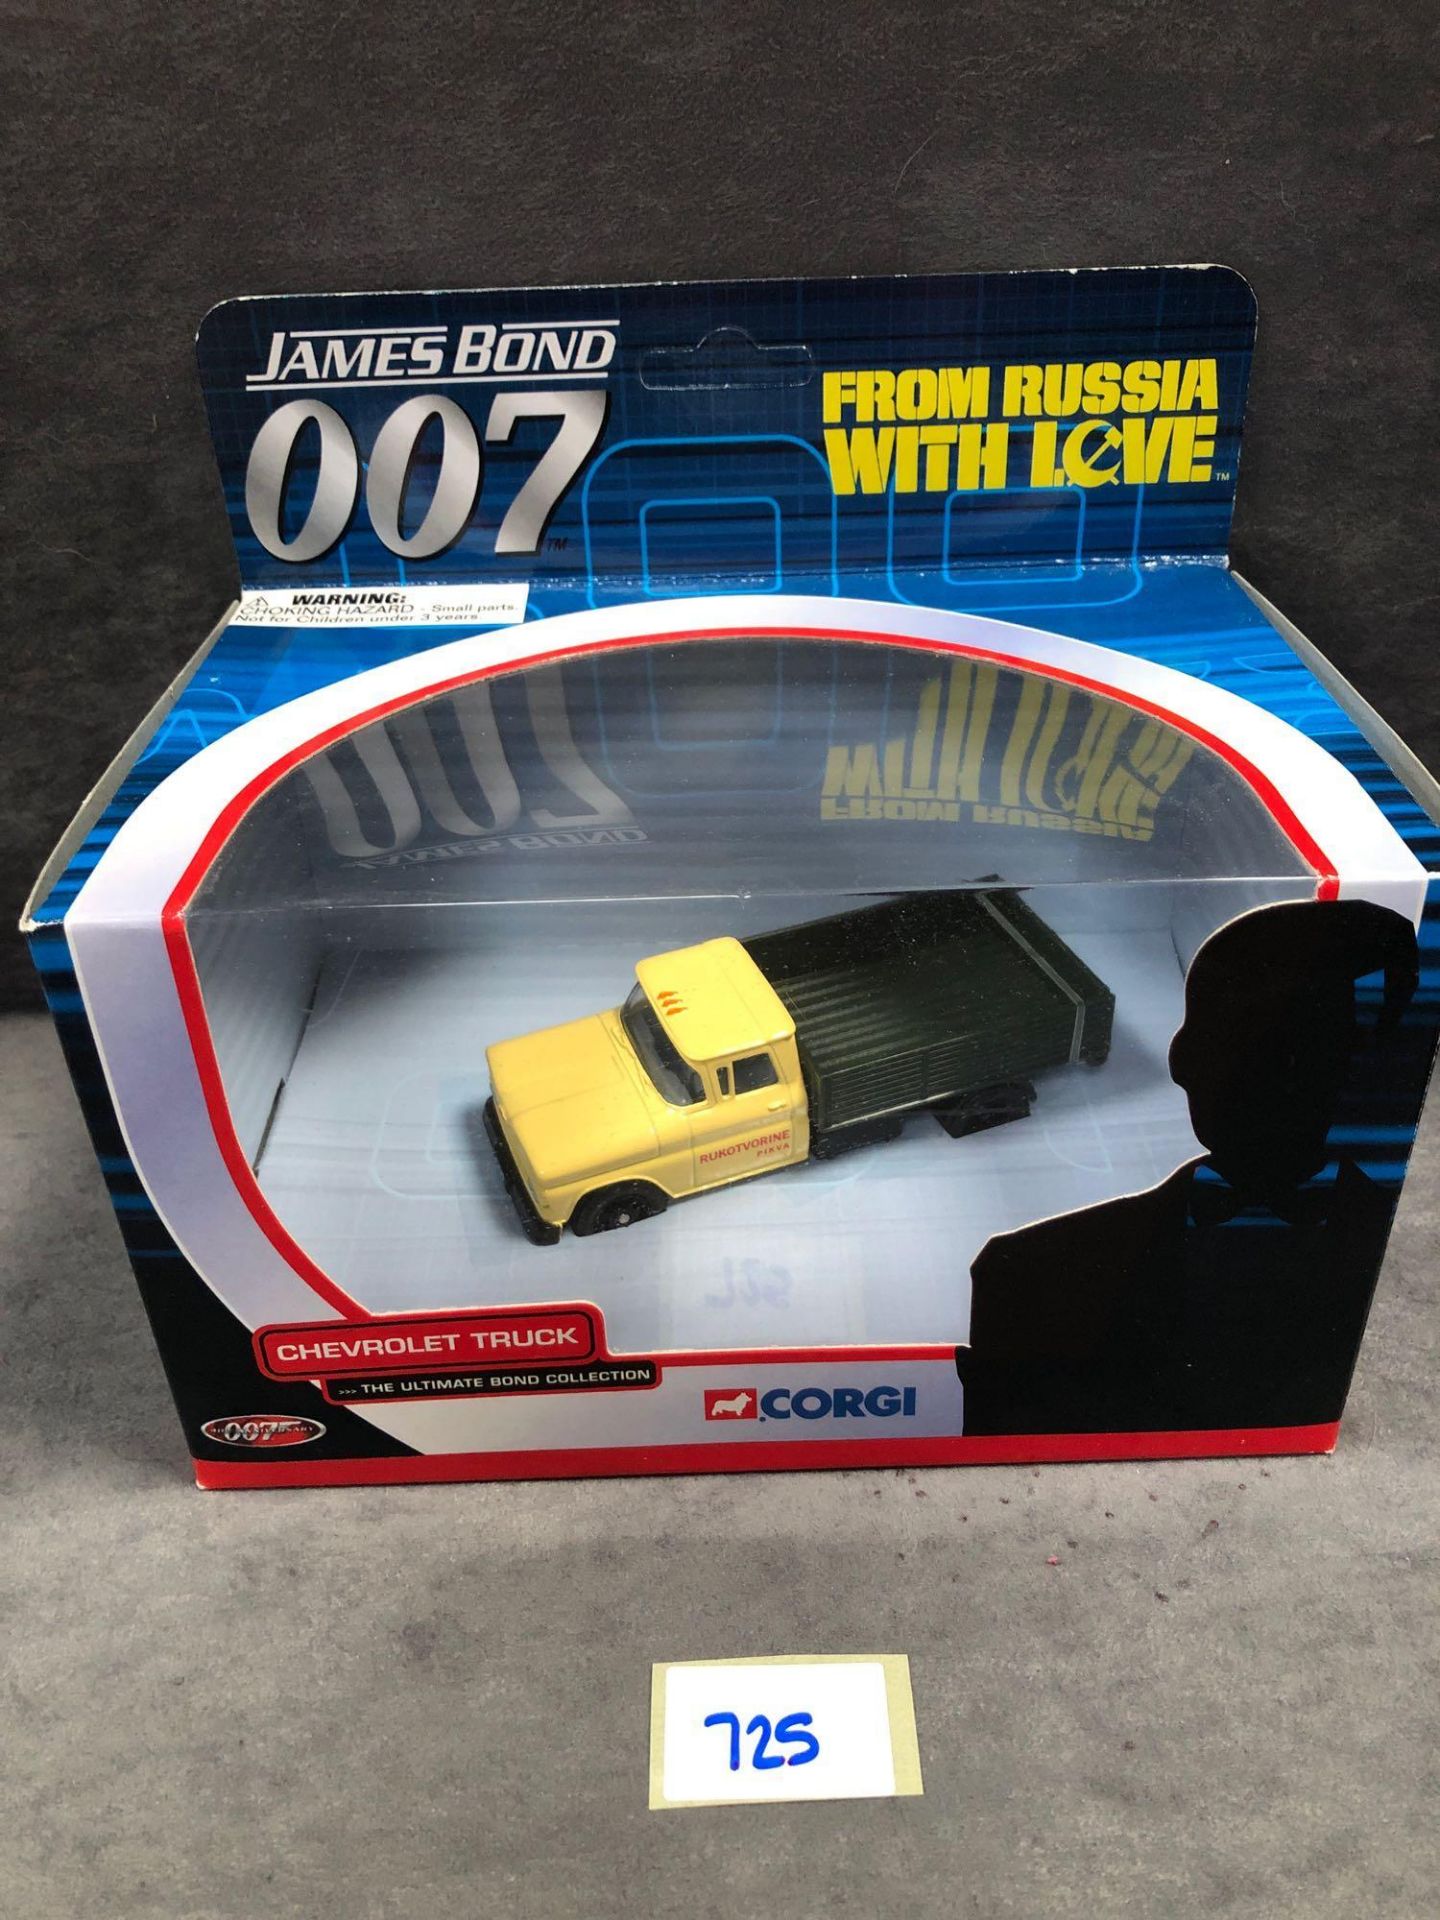 Mint Corgi Diecast James Bond 007 #TY06701 Chevrolet Truck From Russia With Love In Box